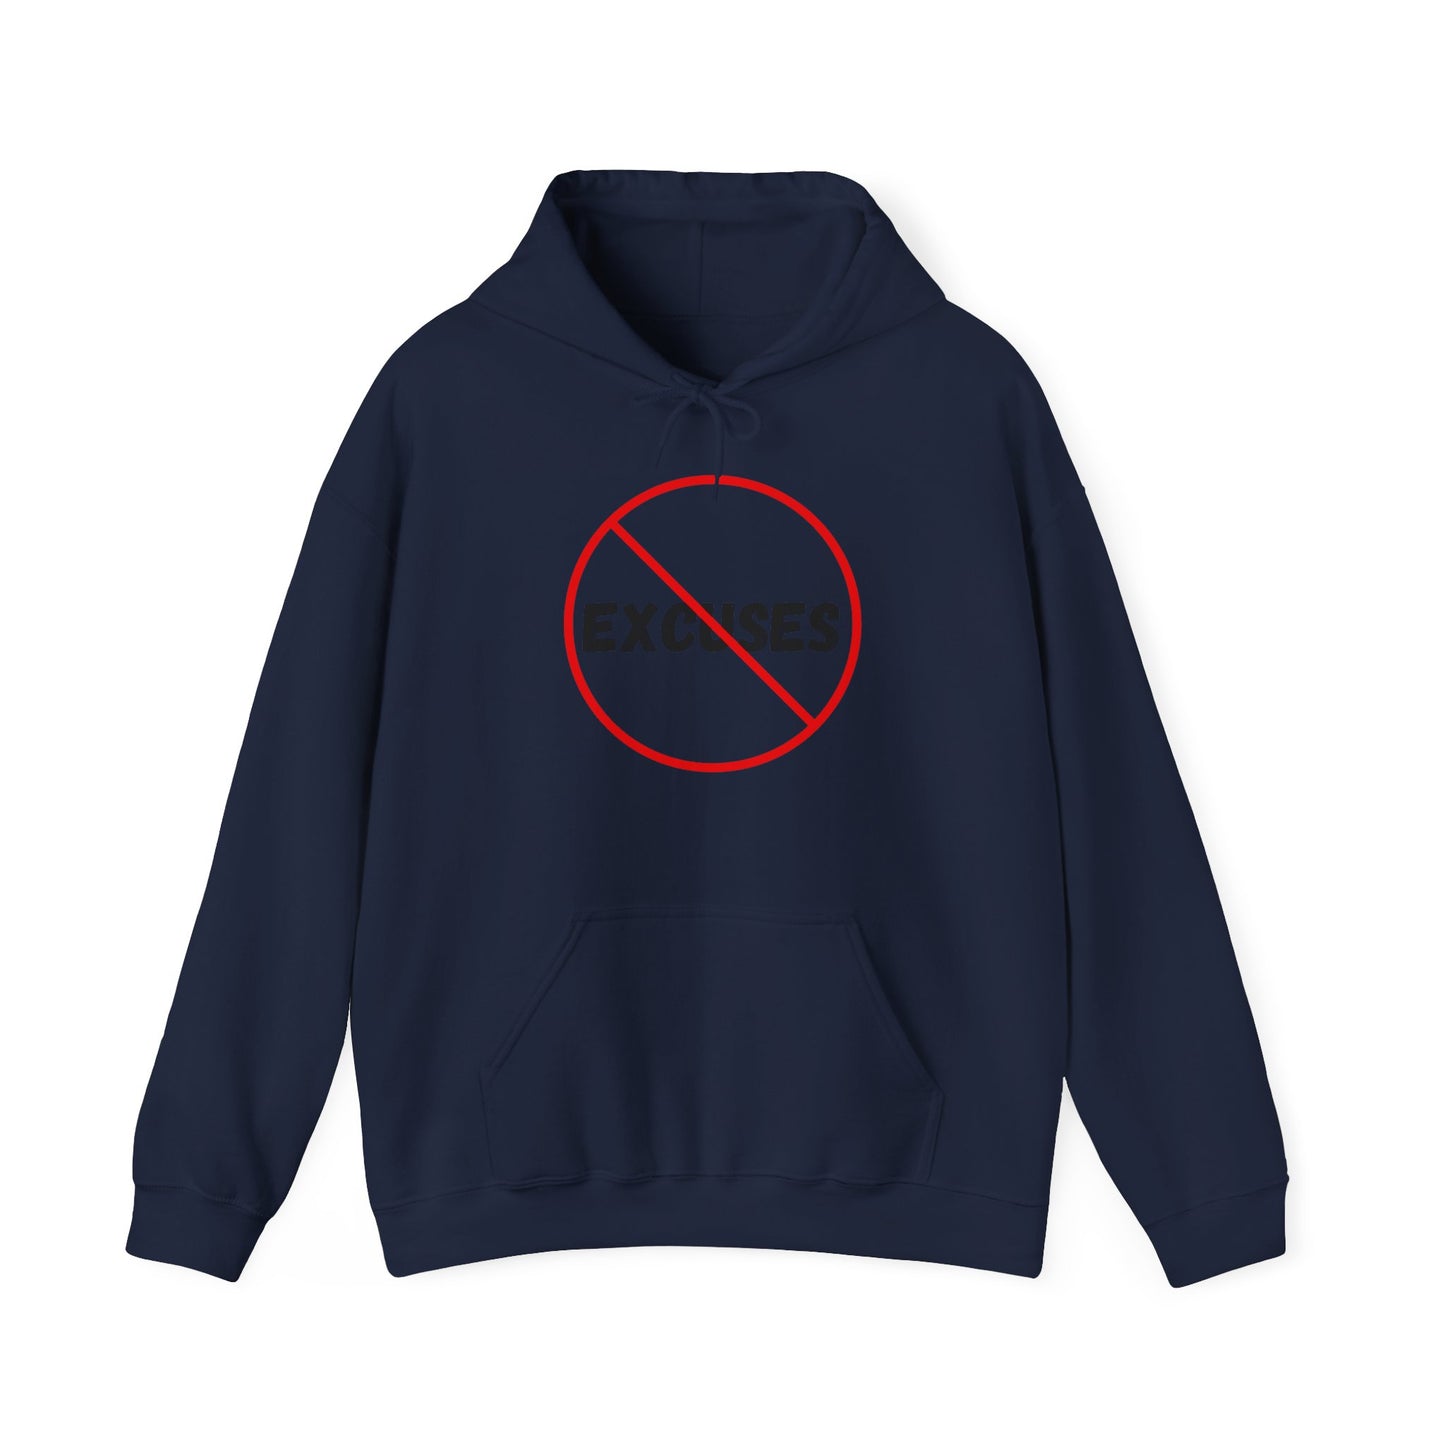 No Excuses Hoodie, Unisex Heavy Blend™ Hooded Sweatshirt, 6 colours, AUS-USA-CAN warehouses, Free post.